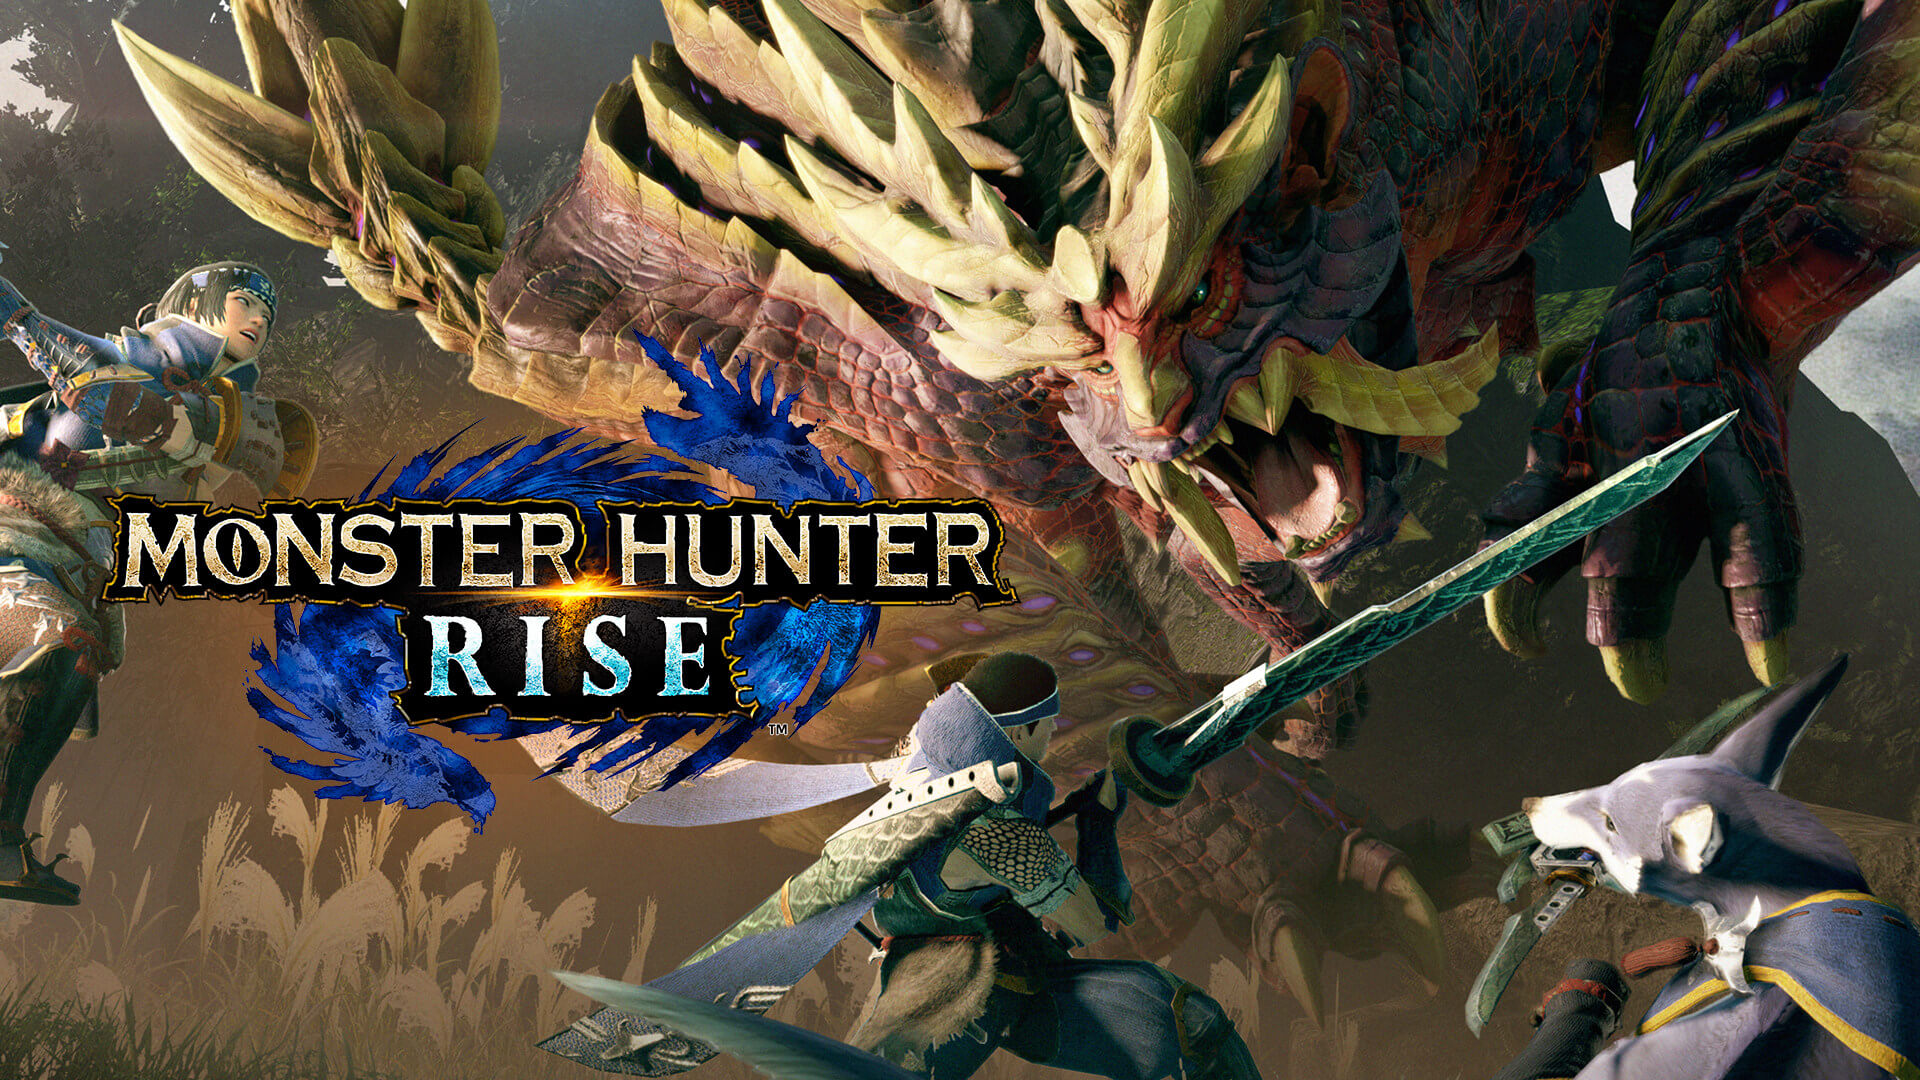 will monster hunter rise be on pc